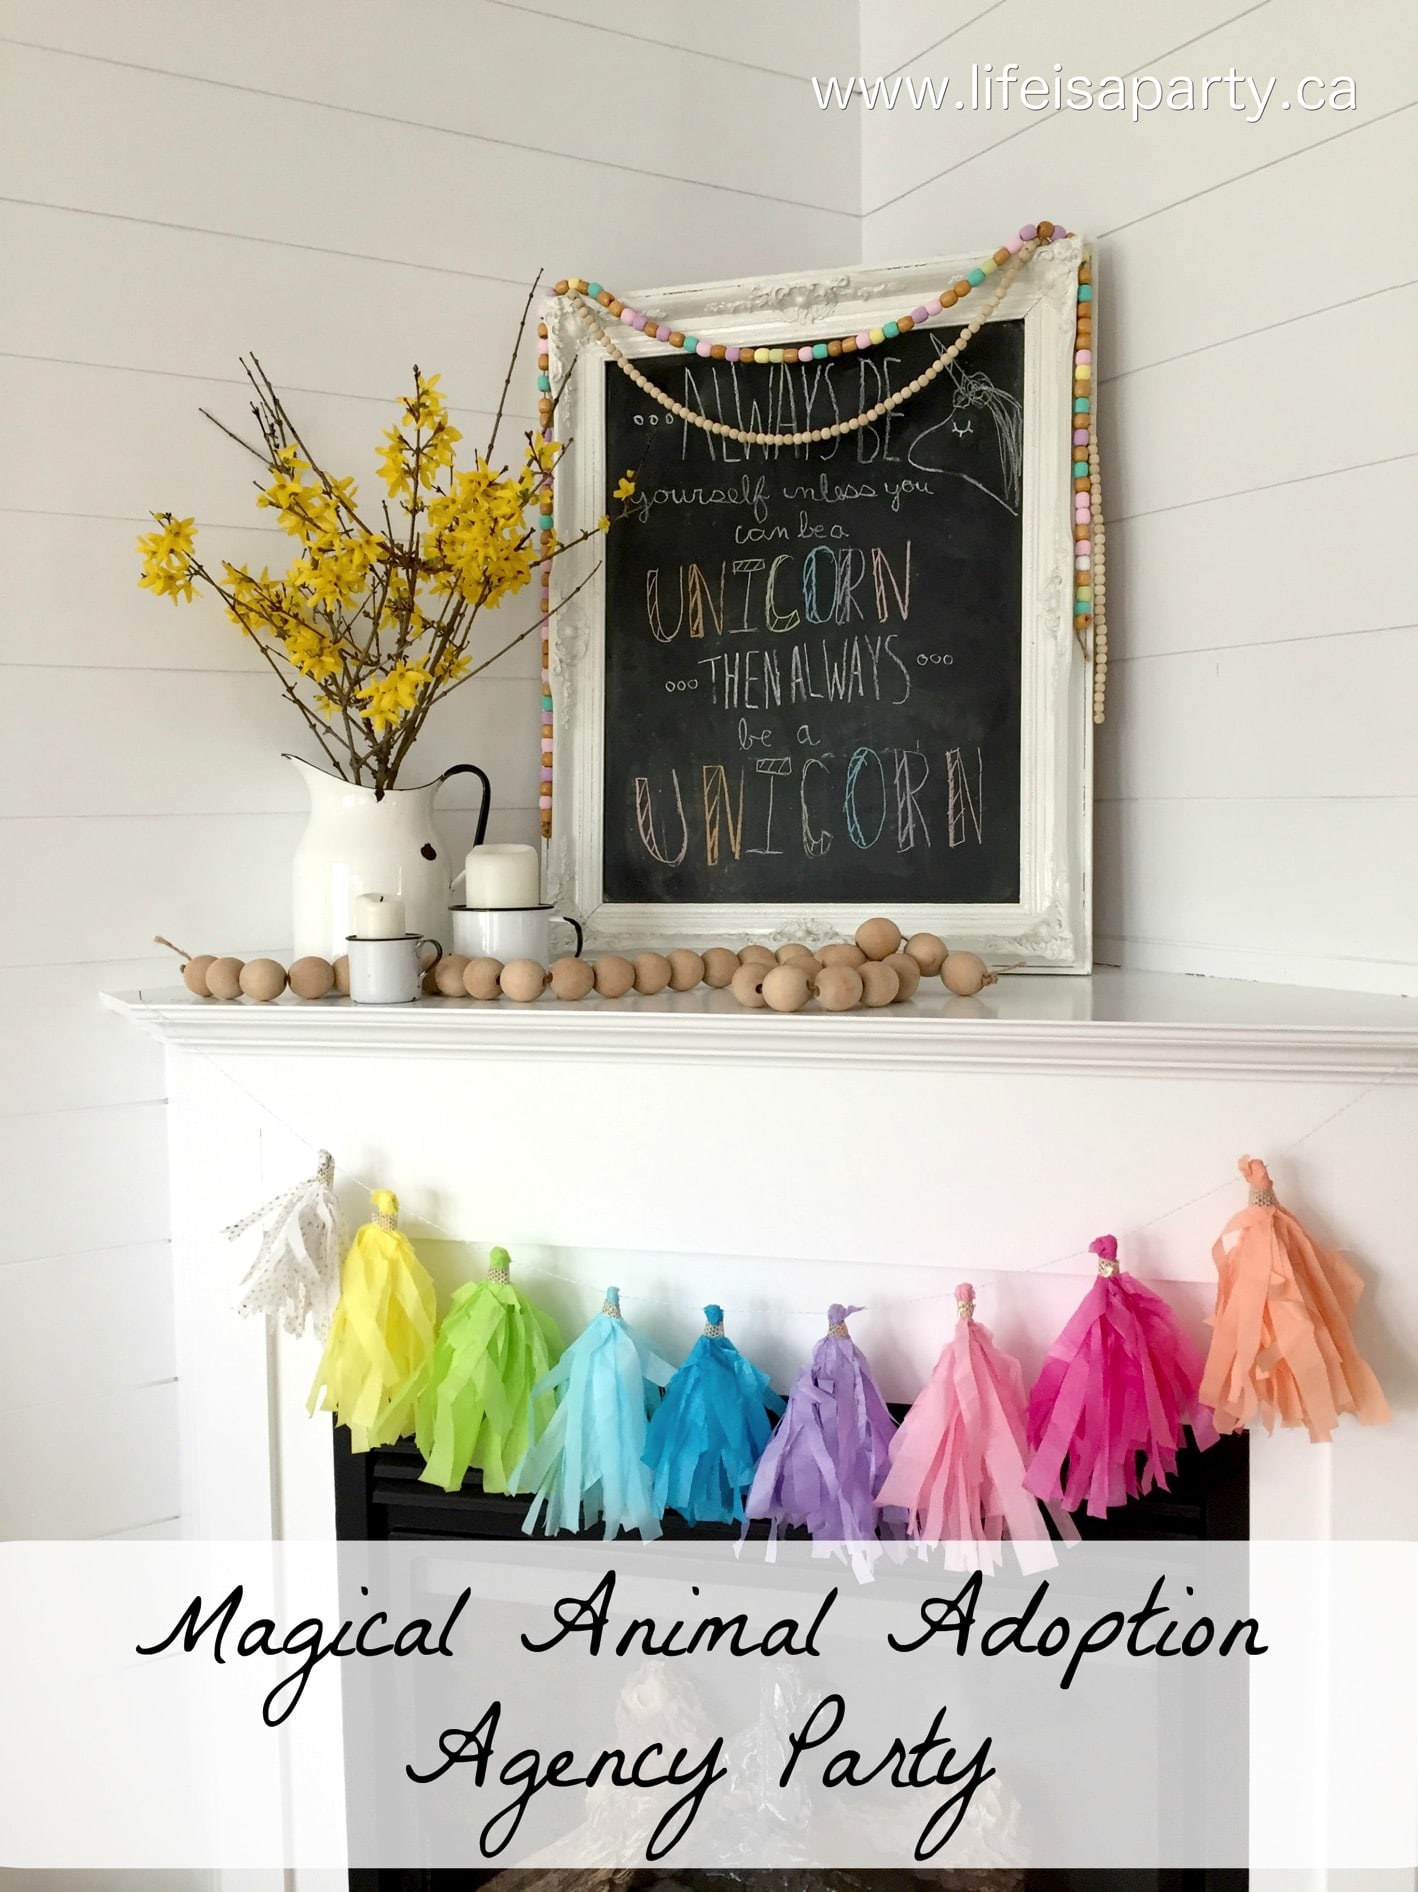 Magical Animal Adoption Agency Party